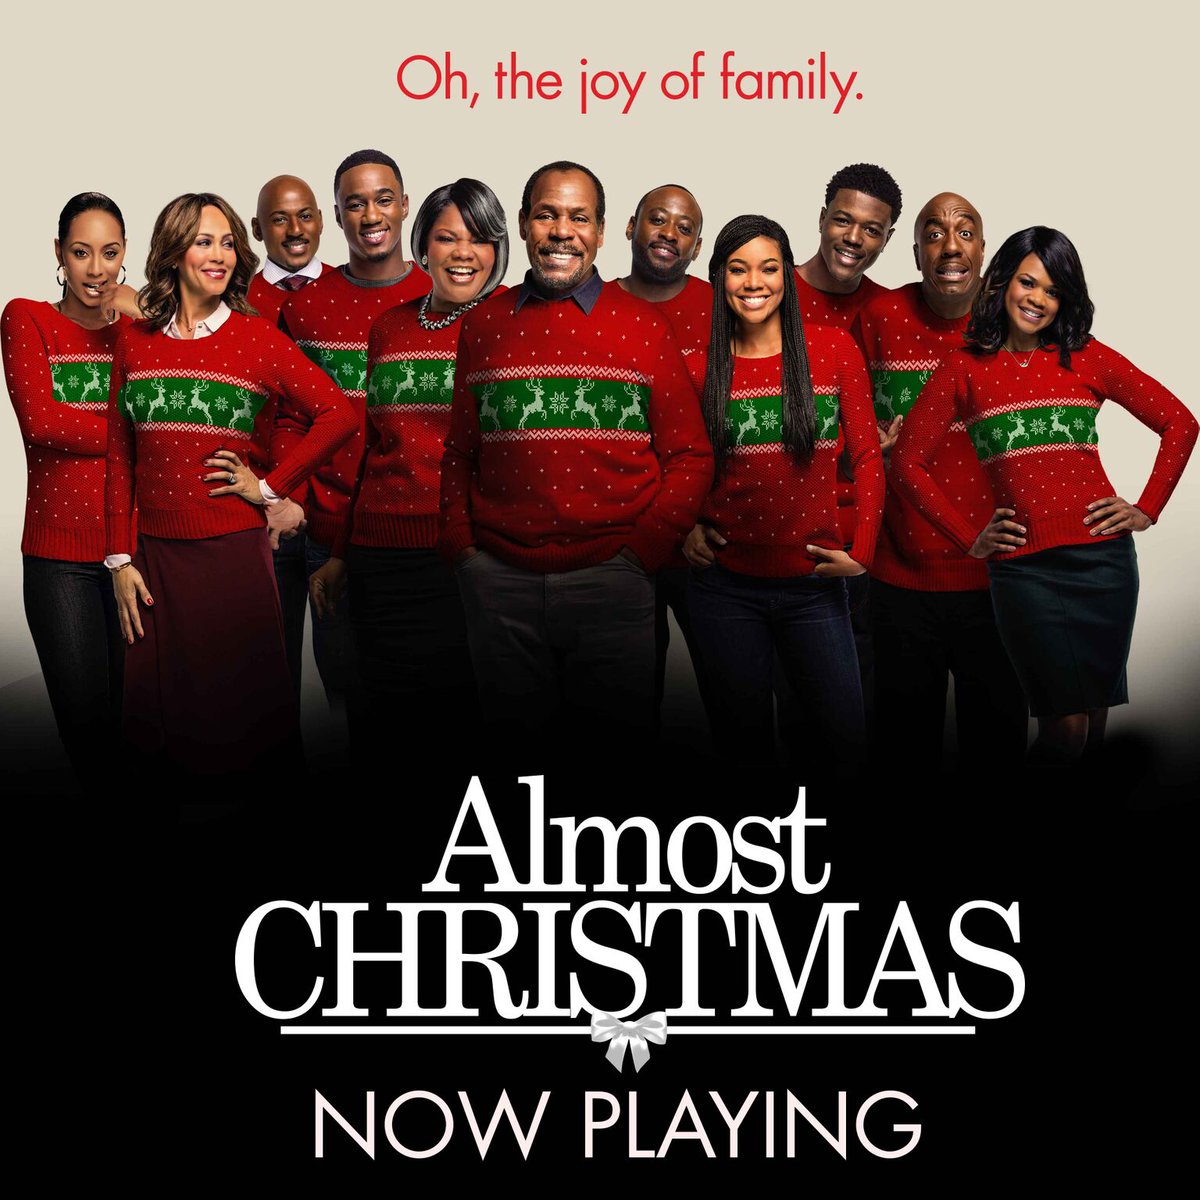 Now that it's December, the holiday spirit is alive more than ever! Come laugh with our #AlmostChristmas family! https://t.co/OVnO4iBWoq